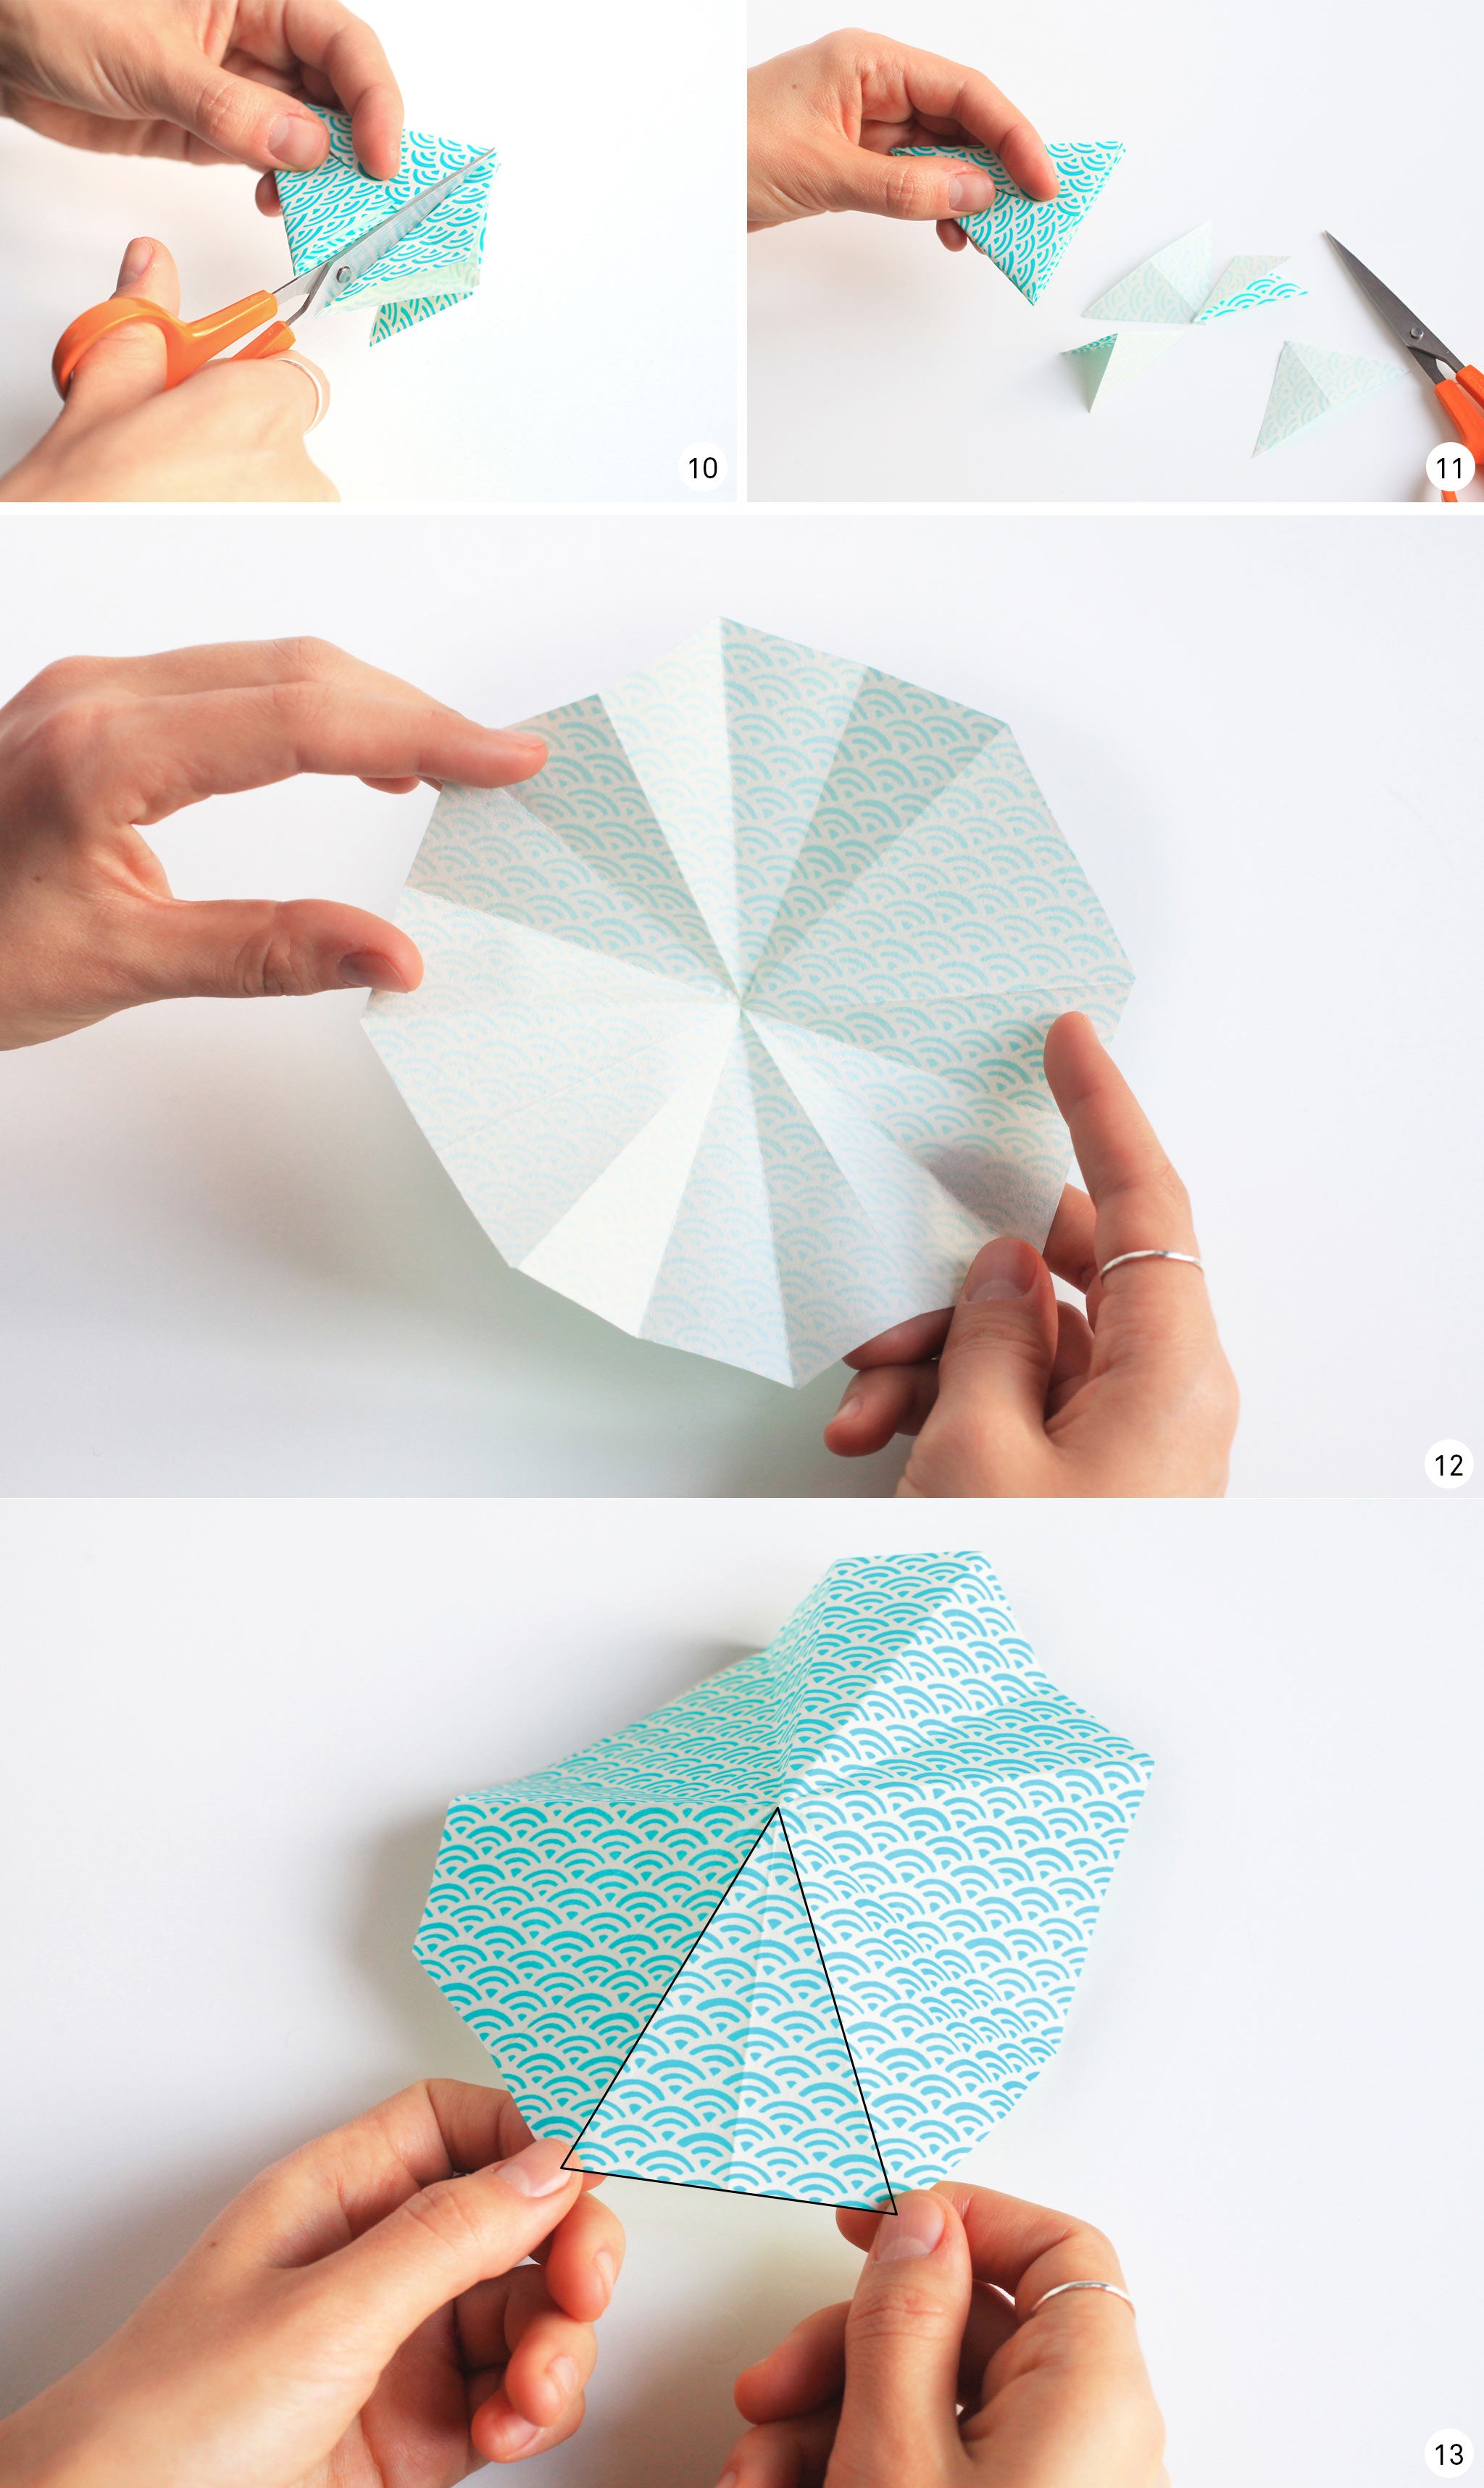 photos-explanations-steps-10-11-12-13-article-blog-tuto-pampille-origami-adeline-klam